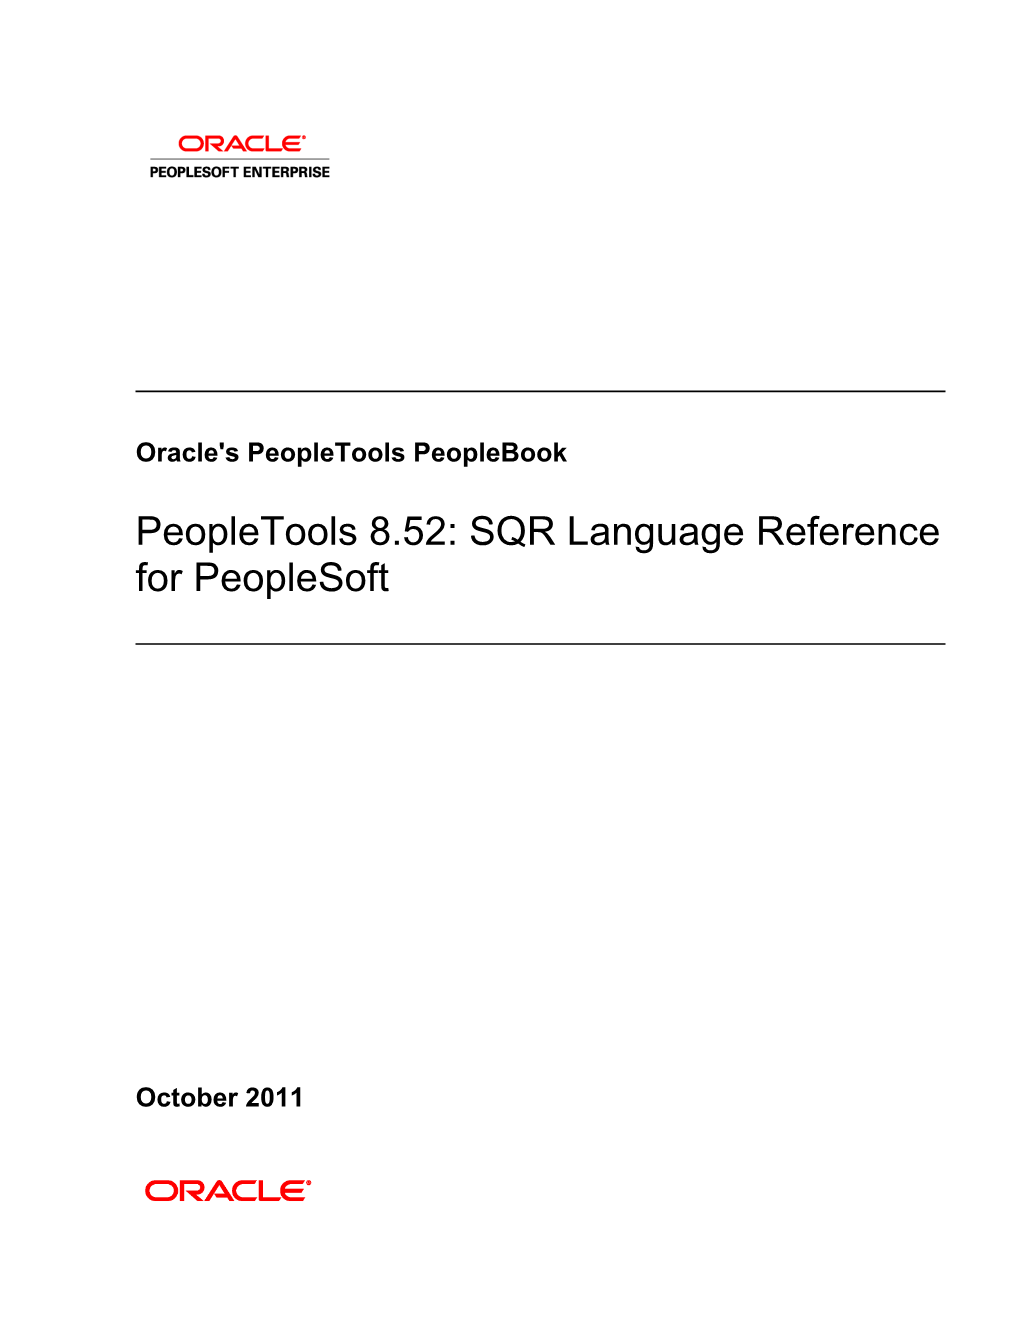 SQR Language Reference for Peoplesoft